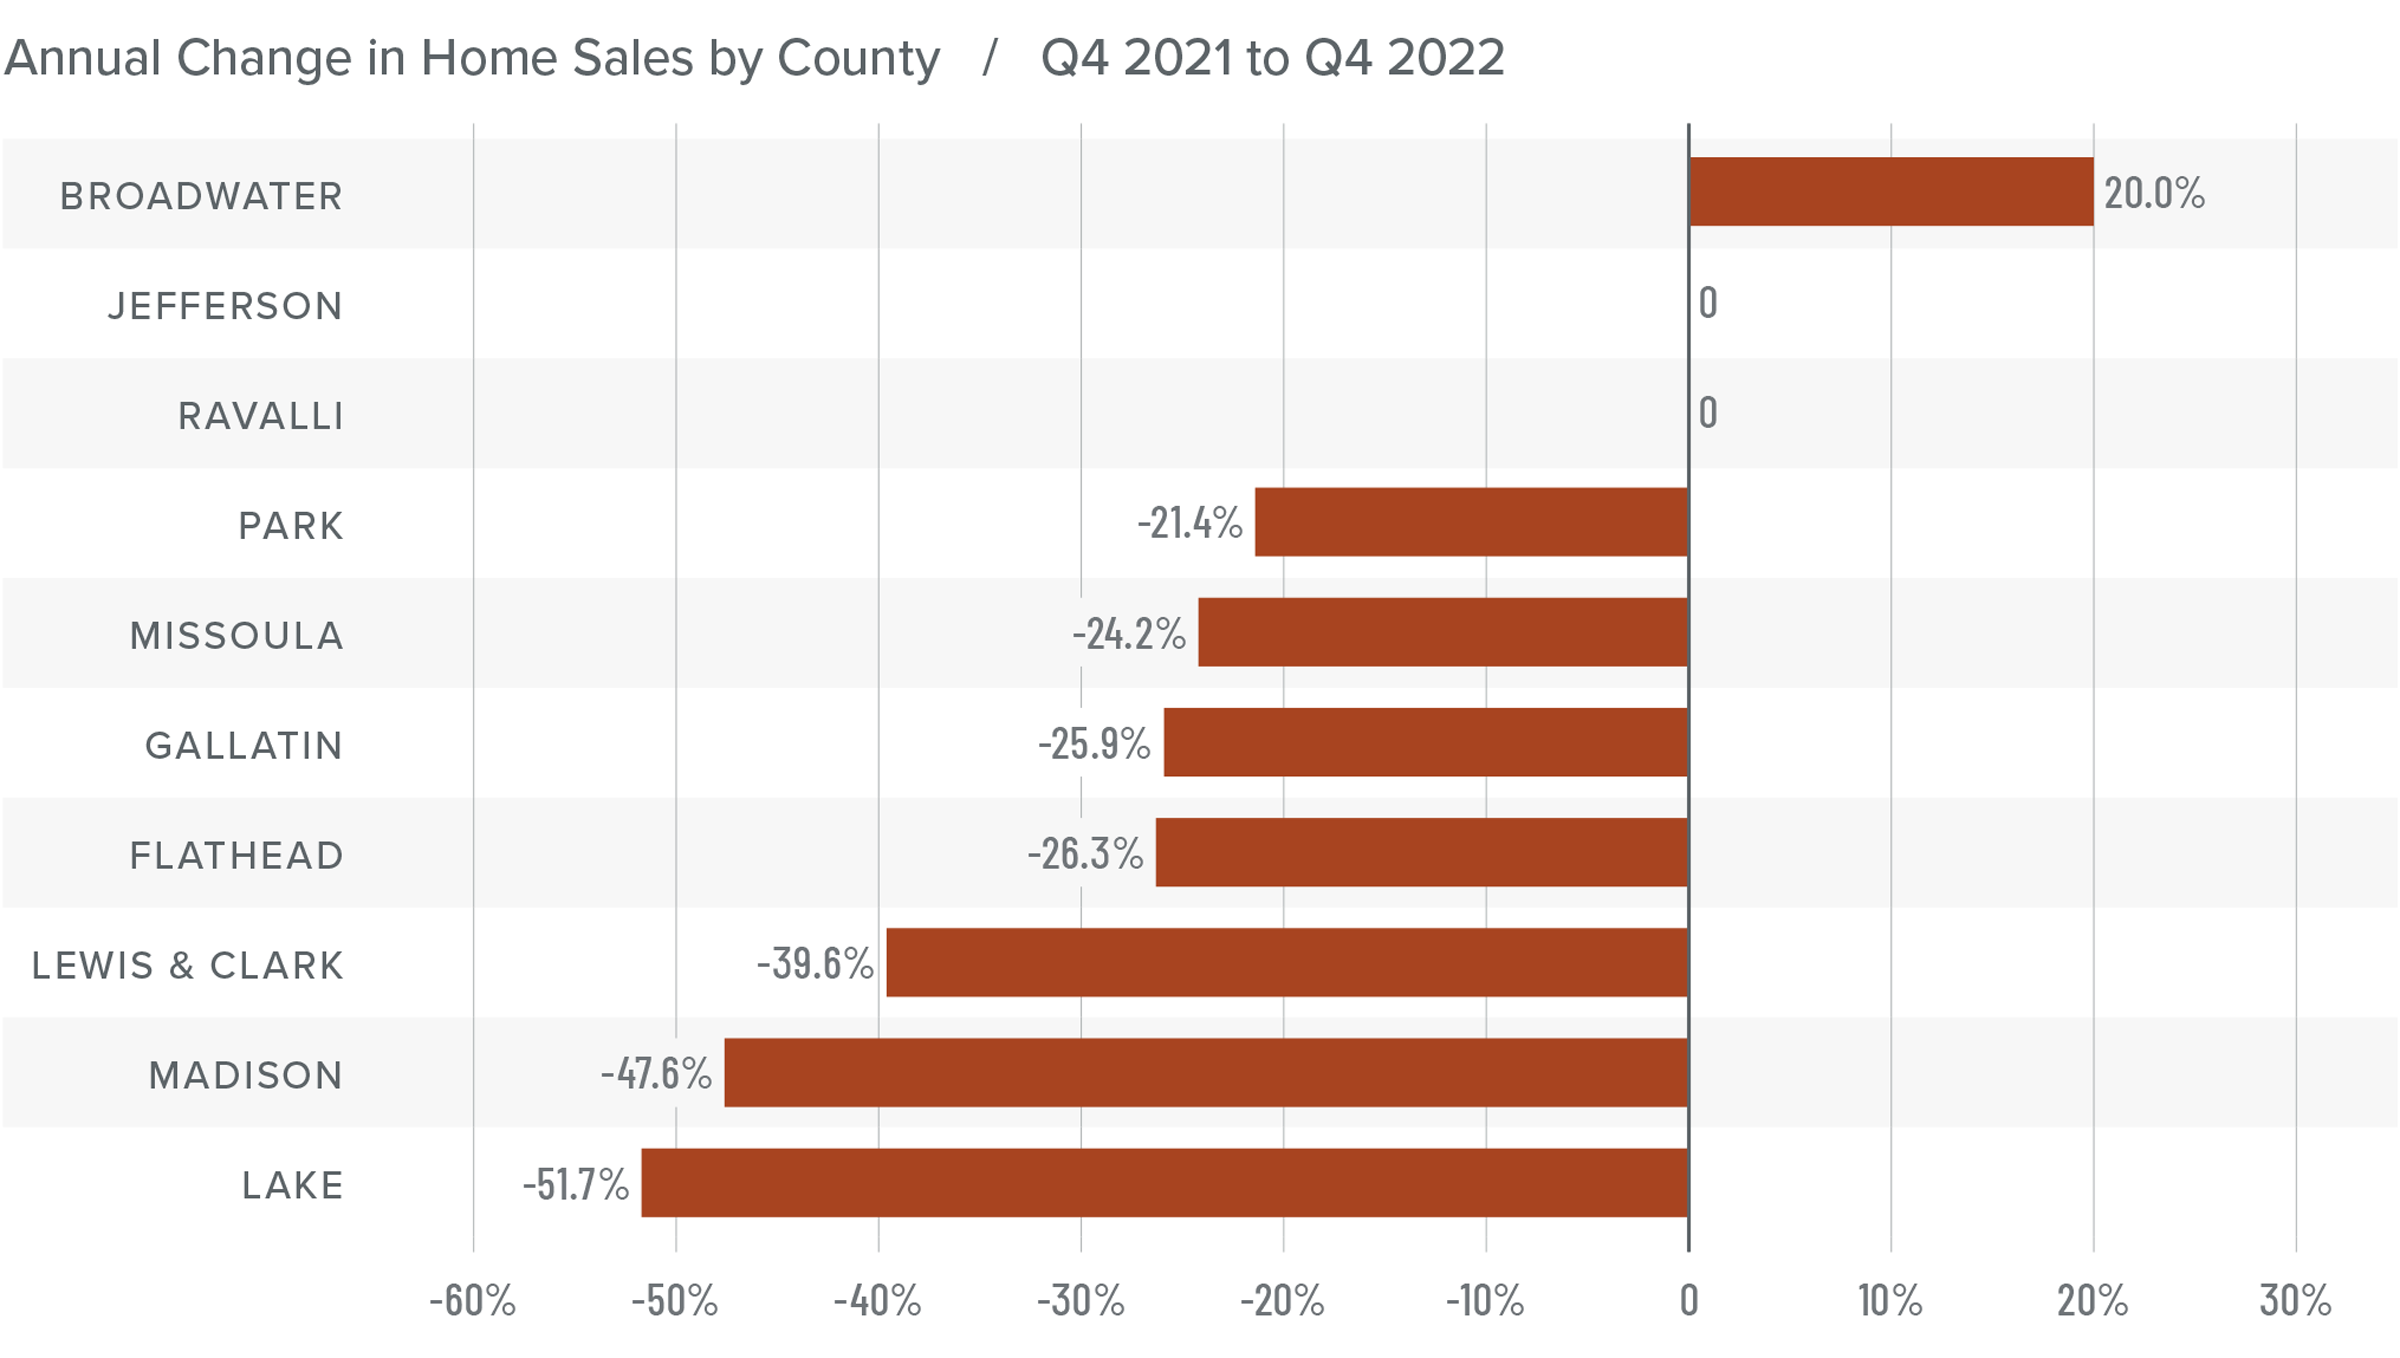 A bar graph showing the annual change in home sales for various counties in Montana from Q4 2021 to Q4 2022. Most counties have a negative percentage year-over-year change. Here are the totals: Broadwater at 20%, Jefferson and Ravalli at 0%, Park -21.4%, Missoula -24.2%, Gallatin at -25.9%, Flathead at -26.3%, Lewis and Clark at -39.6%, Madison at -47.6, and Lake at -51.7%.